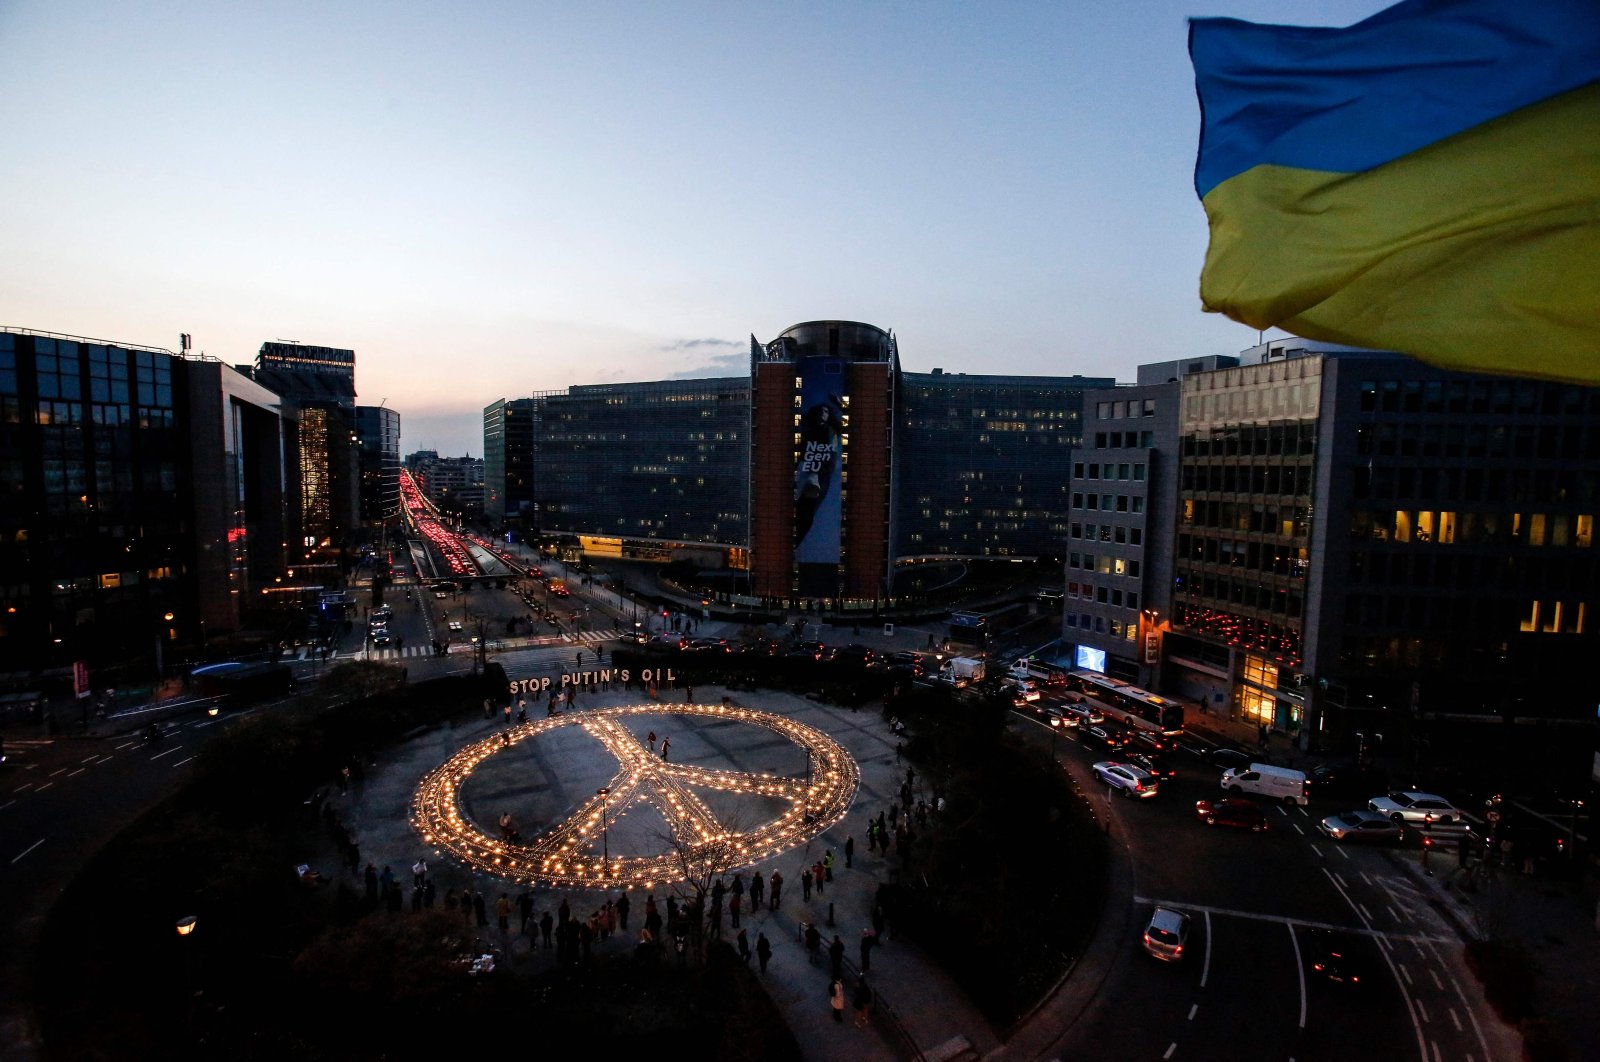 Demonstrators stand around a peace sign during a vigil for Ukraine near the European Union headquarters in Brussels, Belgium, March 22, 2022. (AFP Photo)